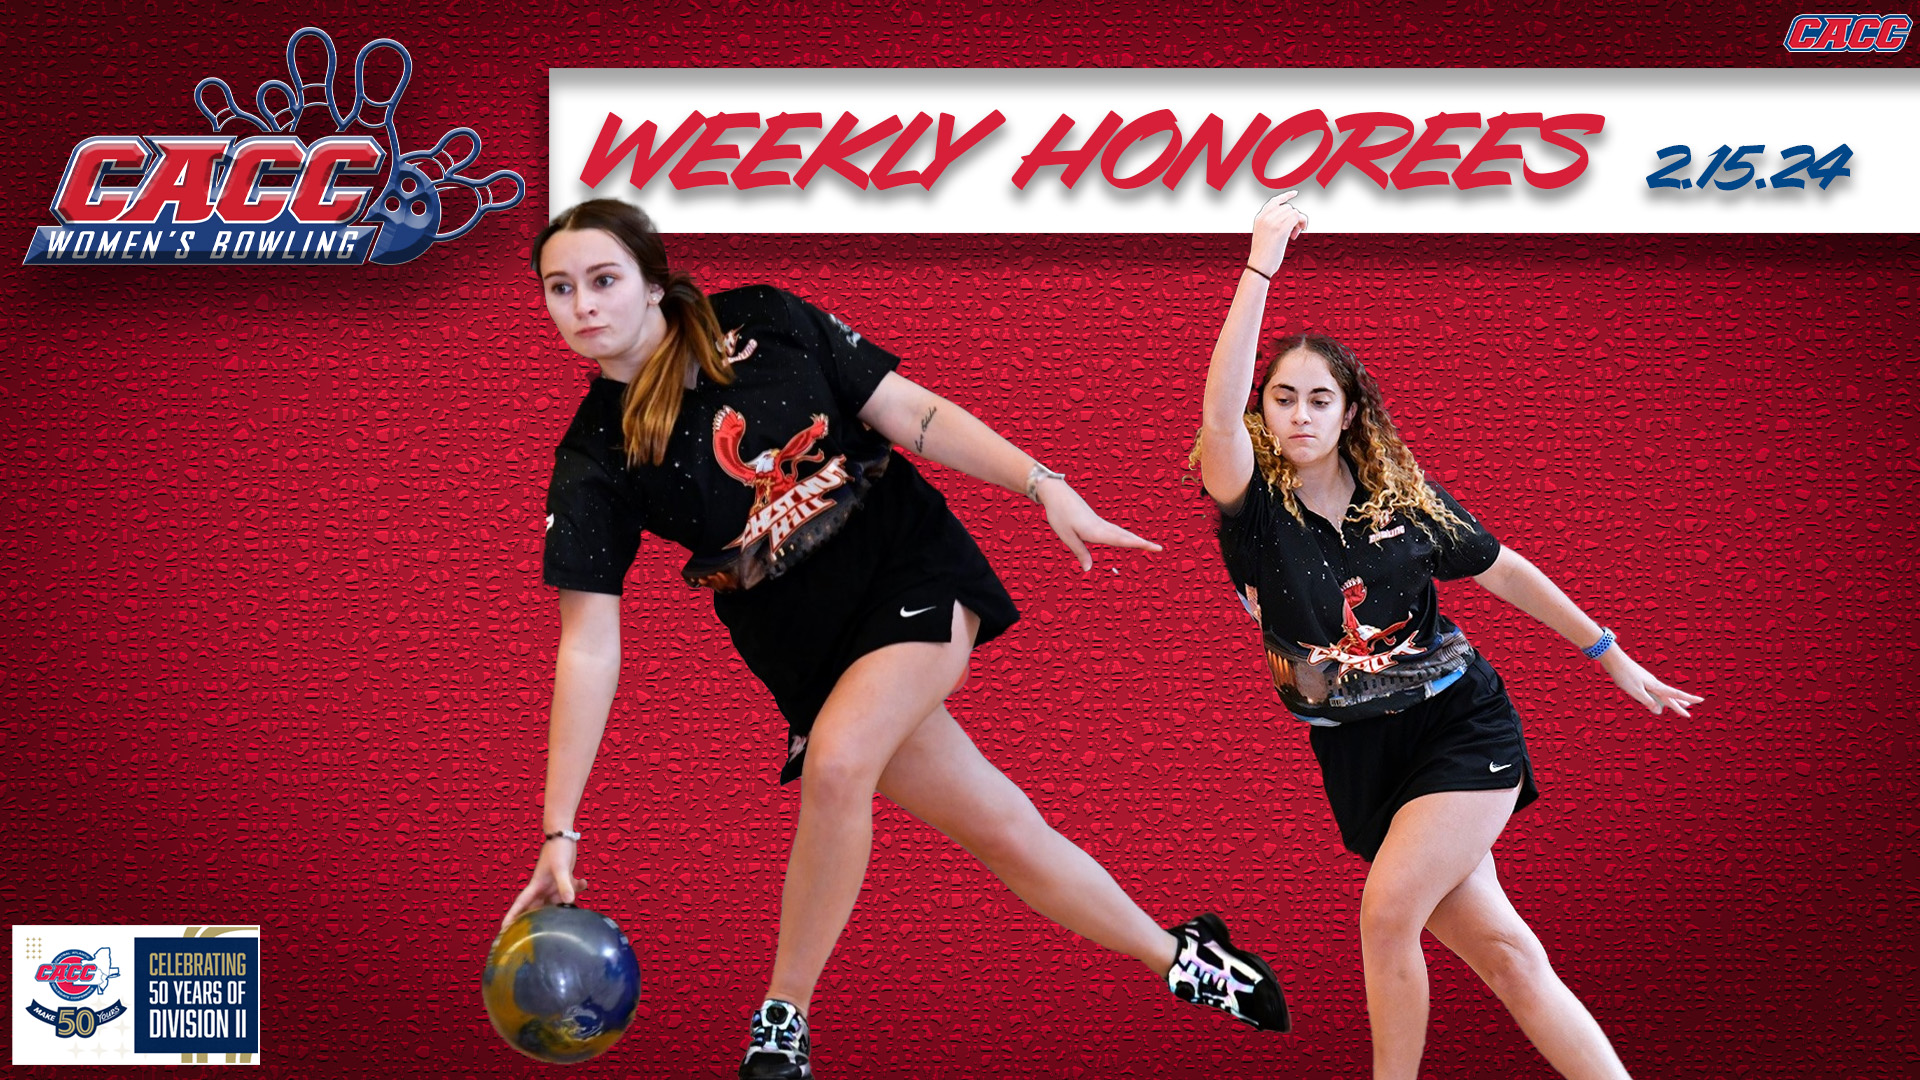 CACC Women's Bowling Weekly Honorees (2-15-24)